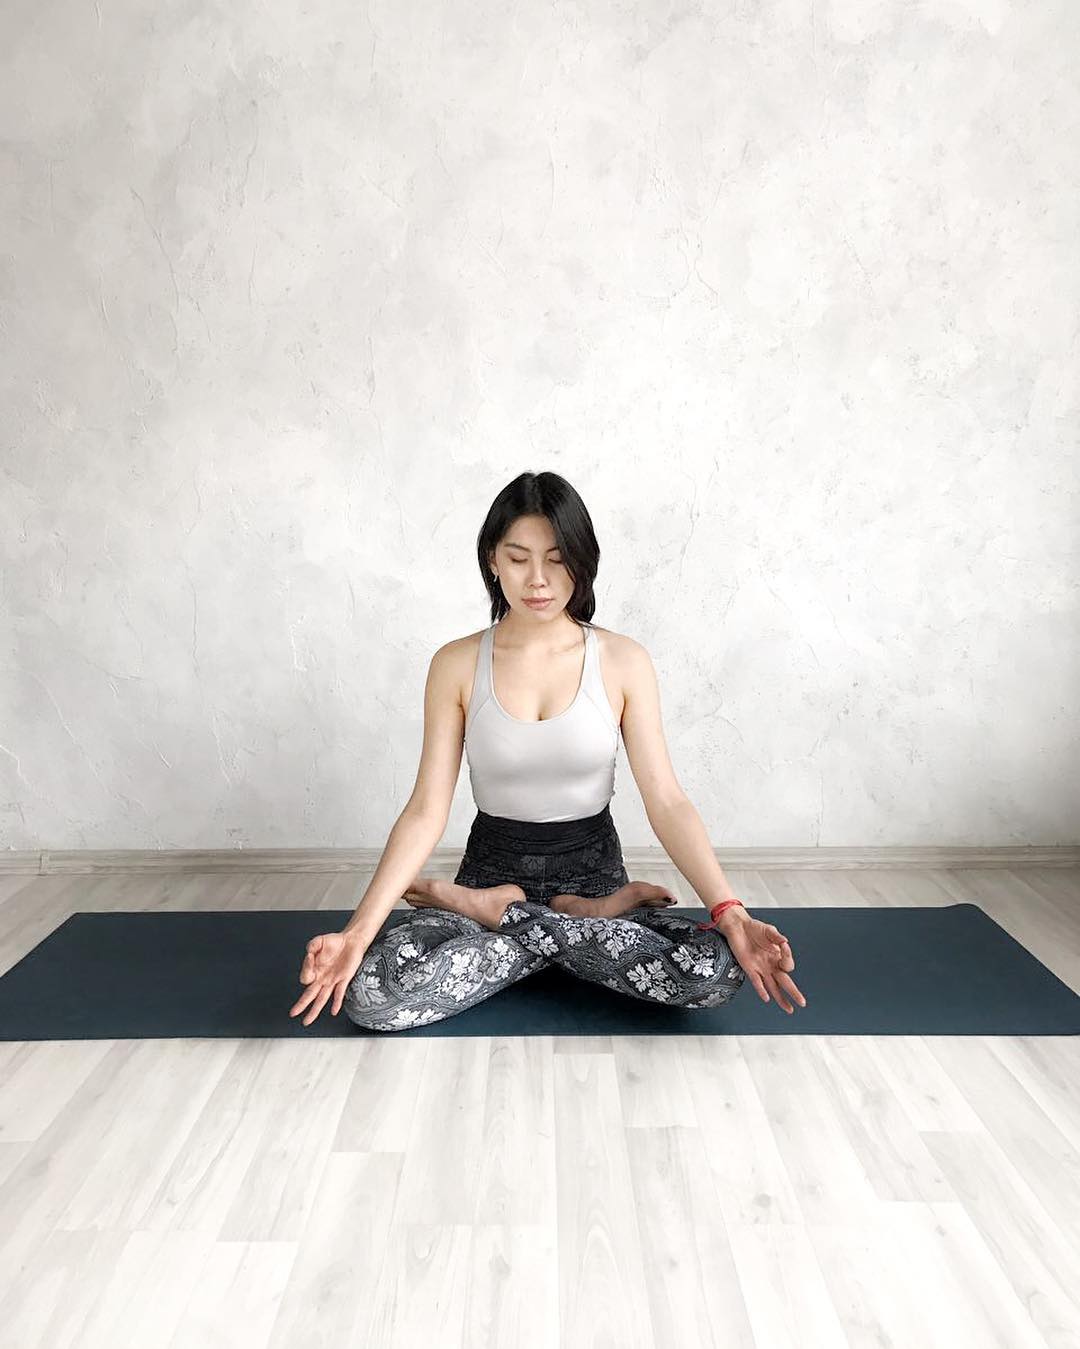 A woman meditating on a yoga mat with crossed legs